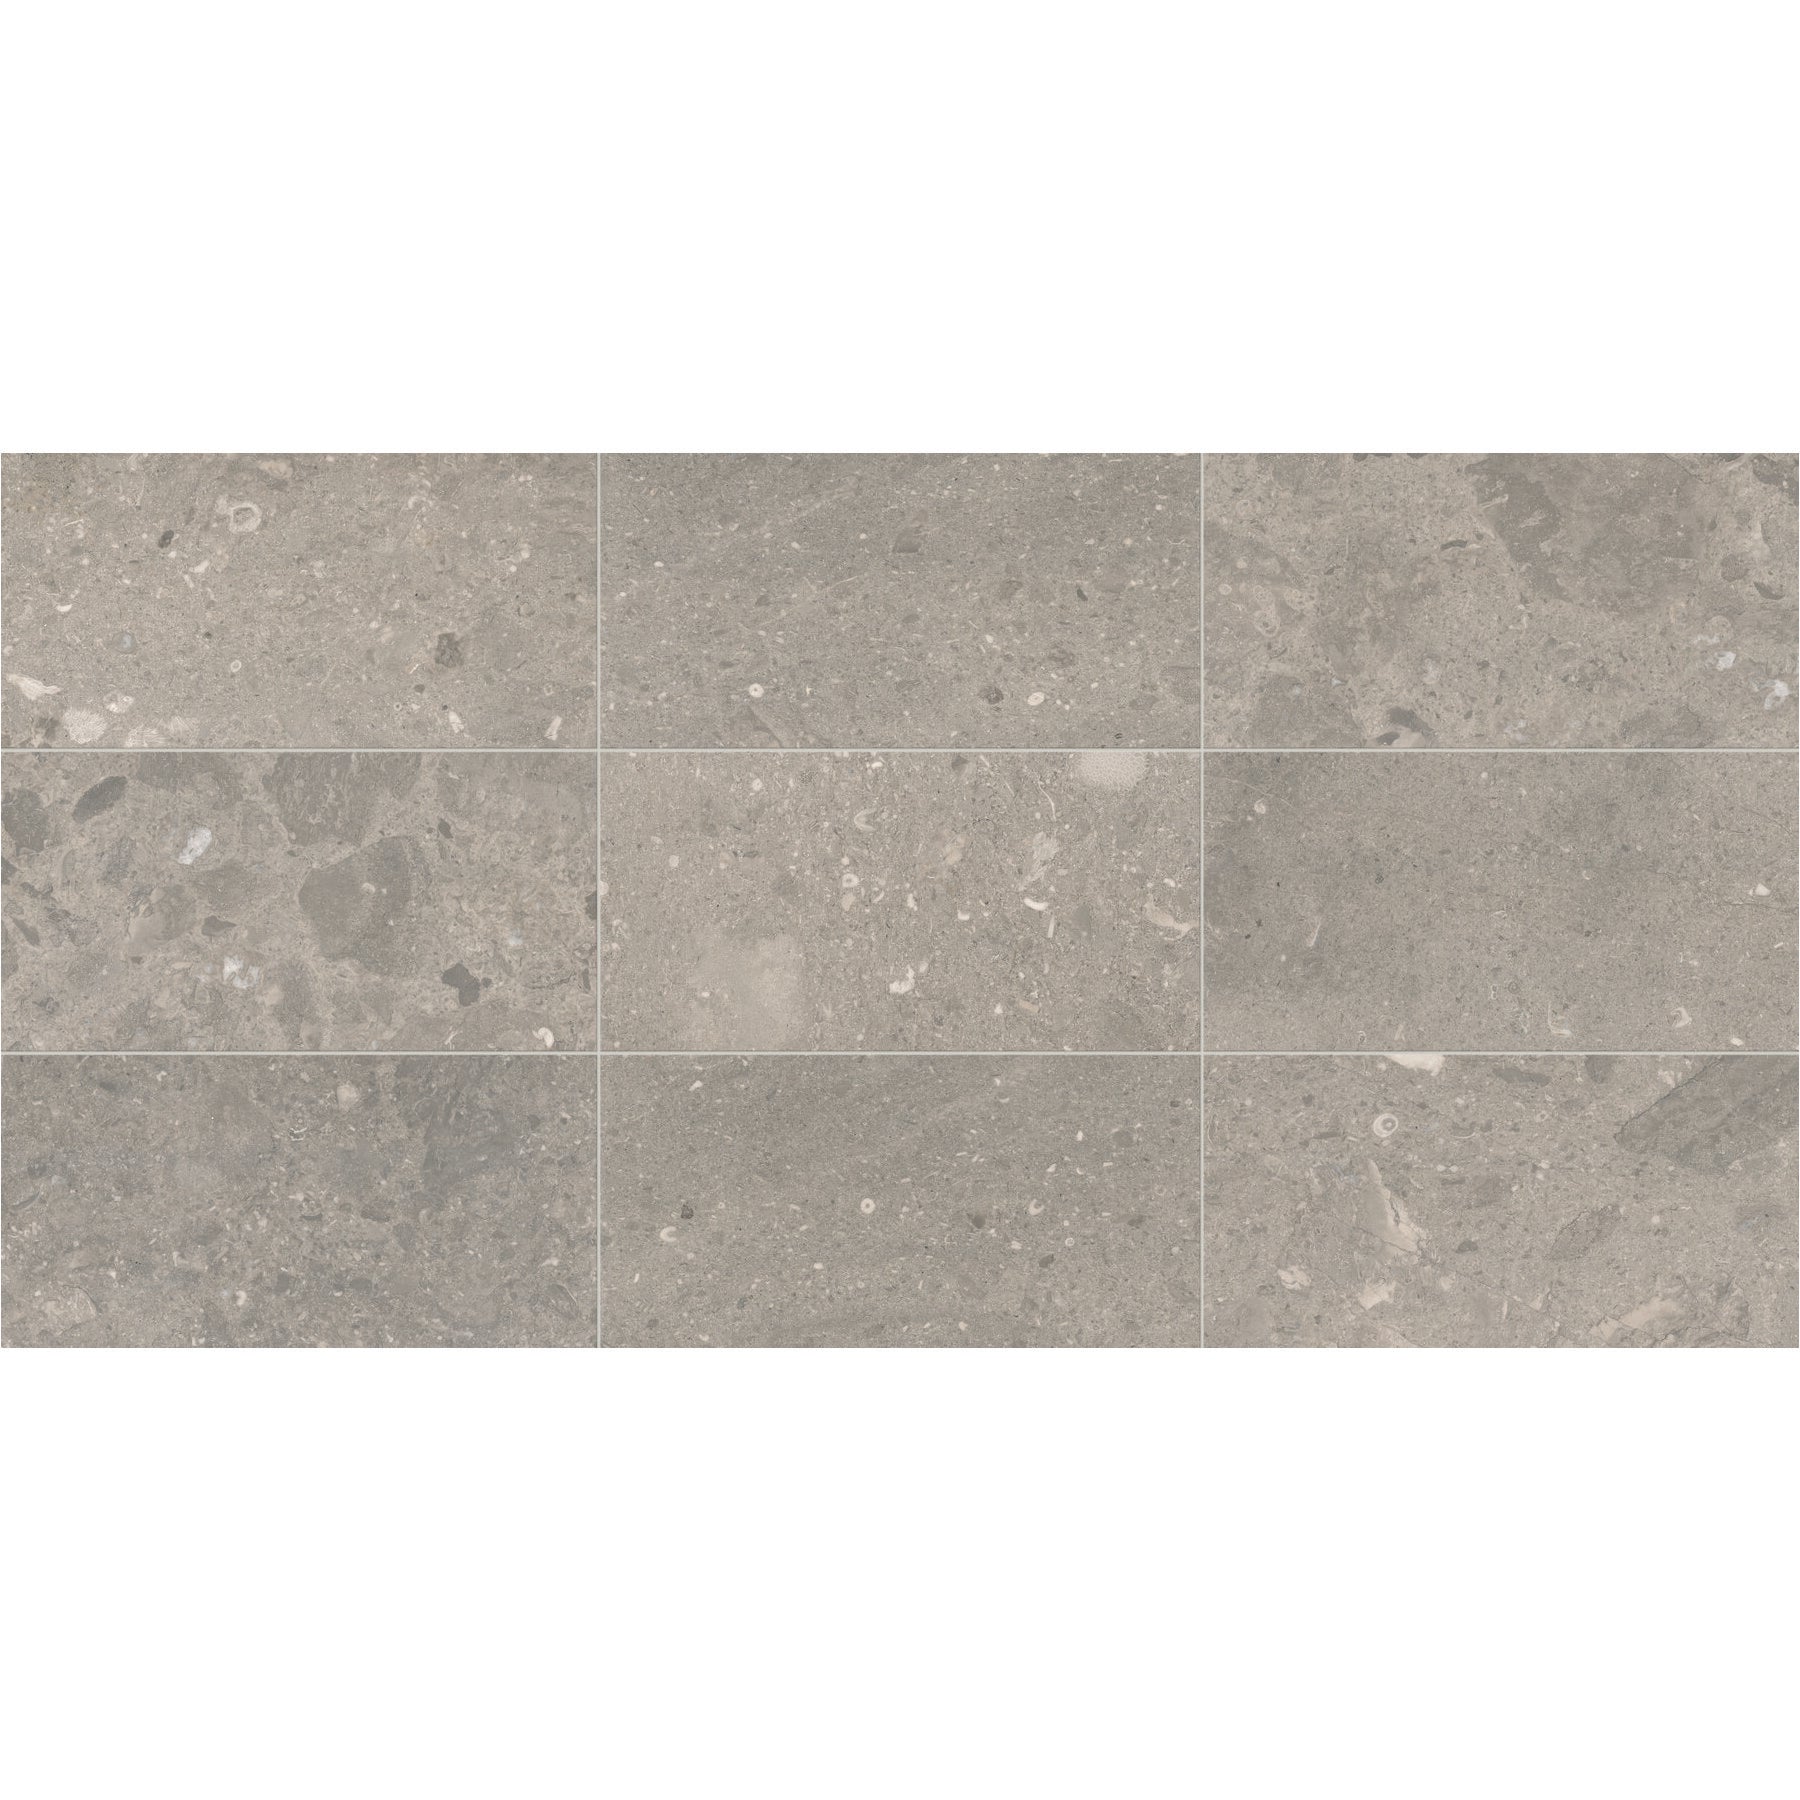 Daltile - Center City - 4 in. x 12 in. Natural Stone - Arch Grey Polished